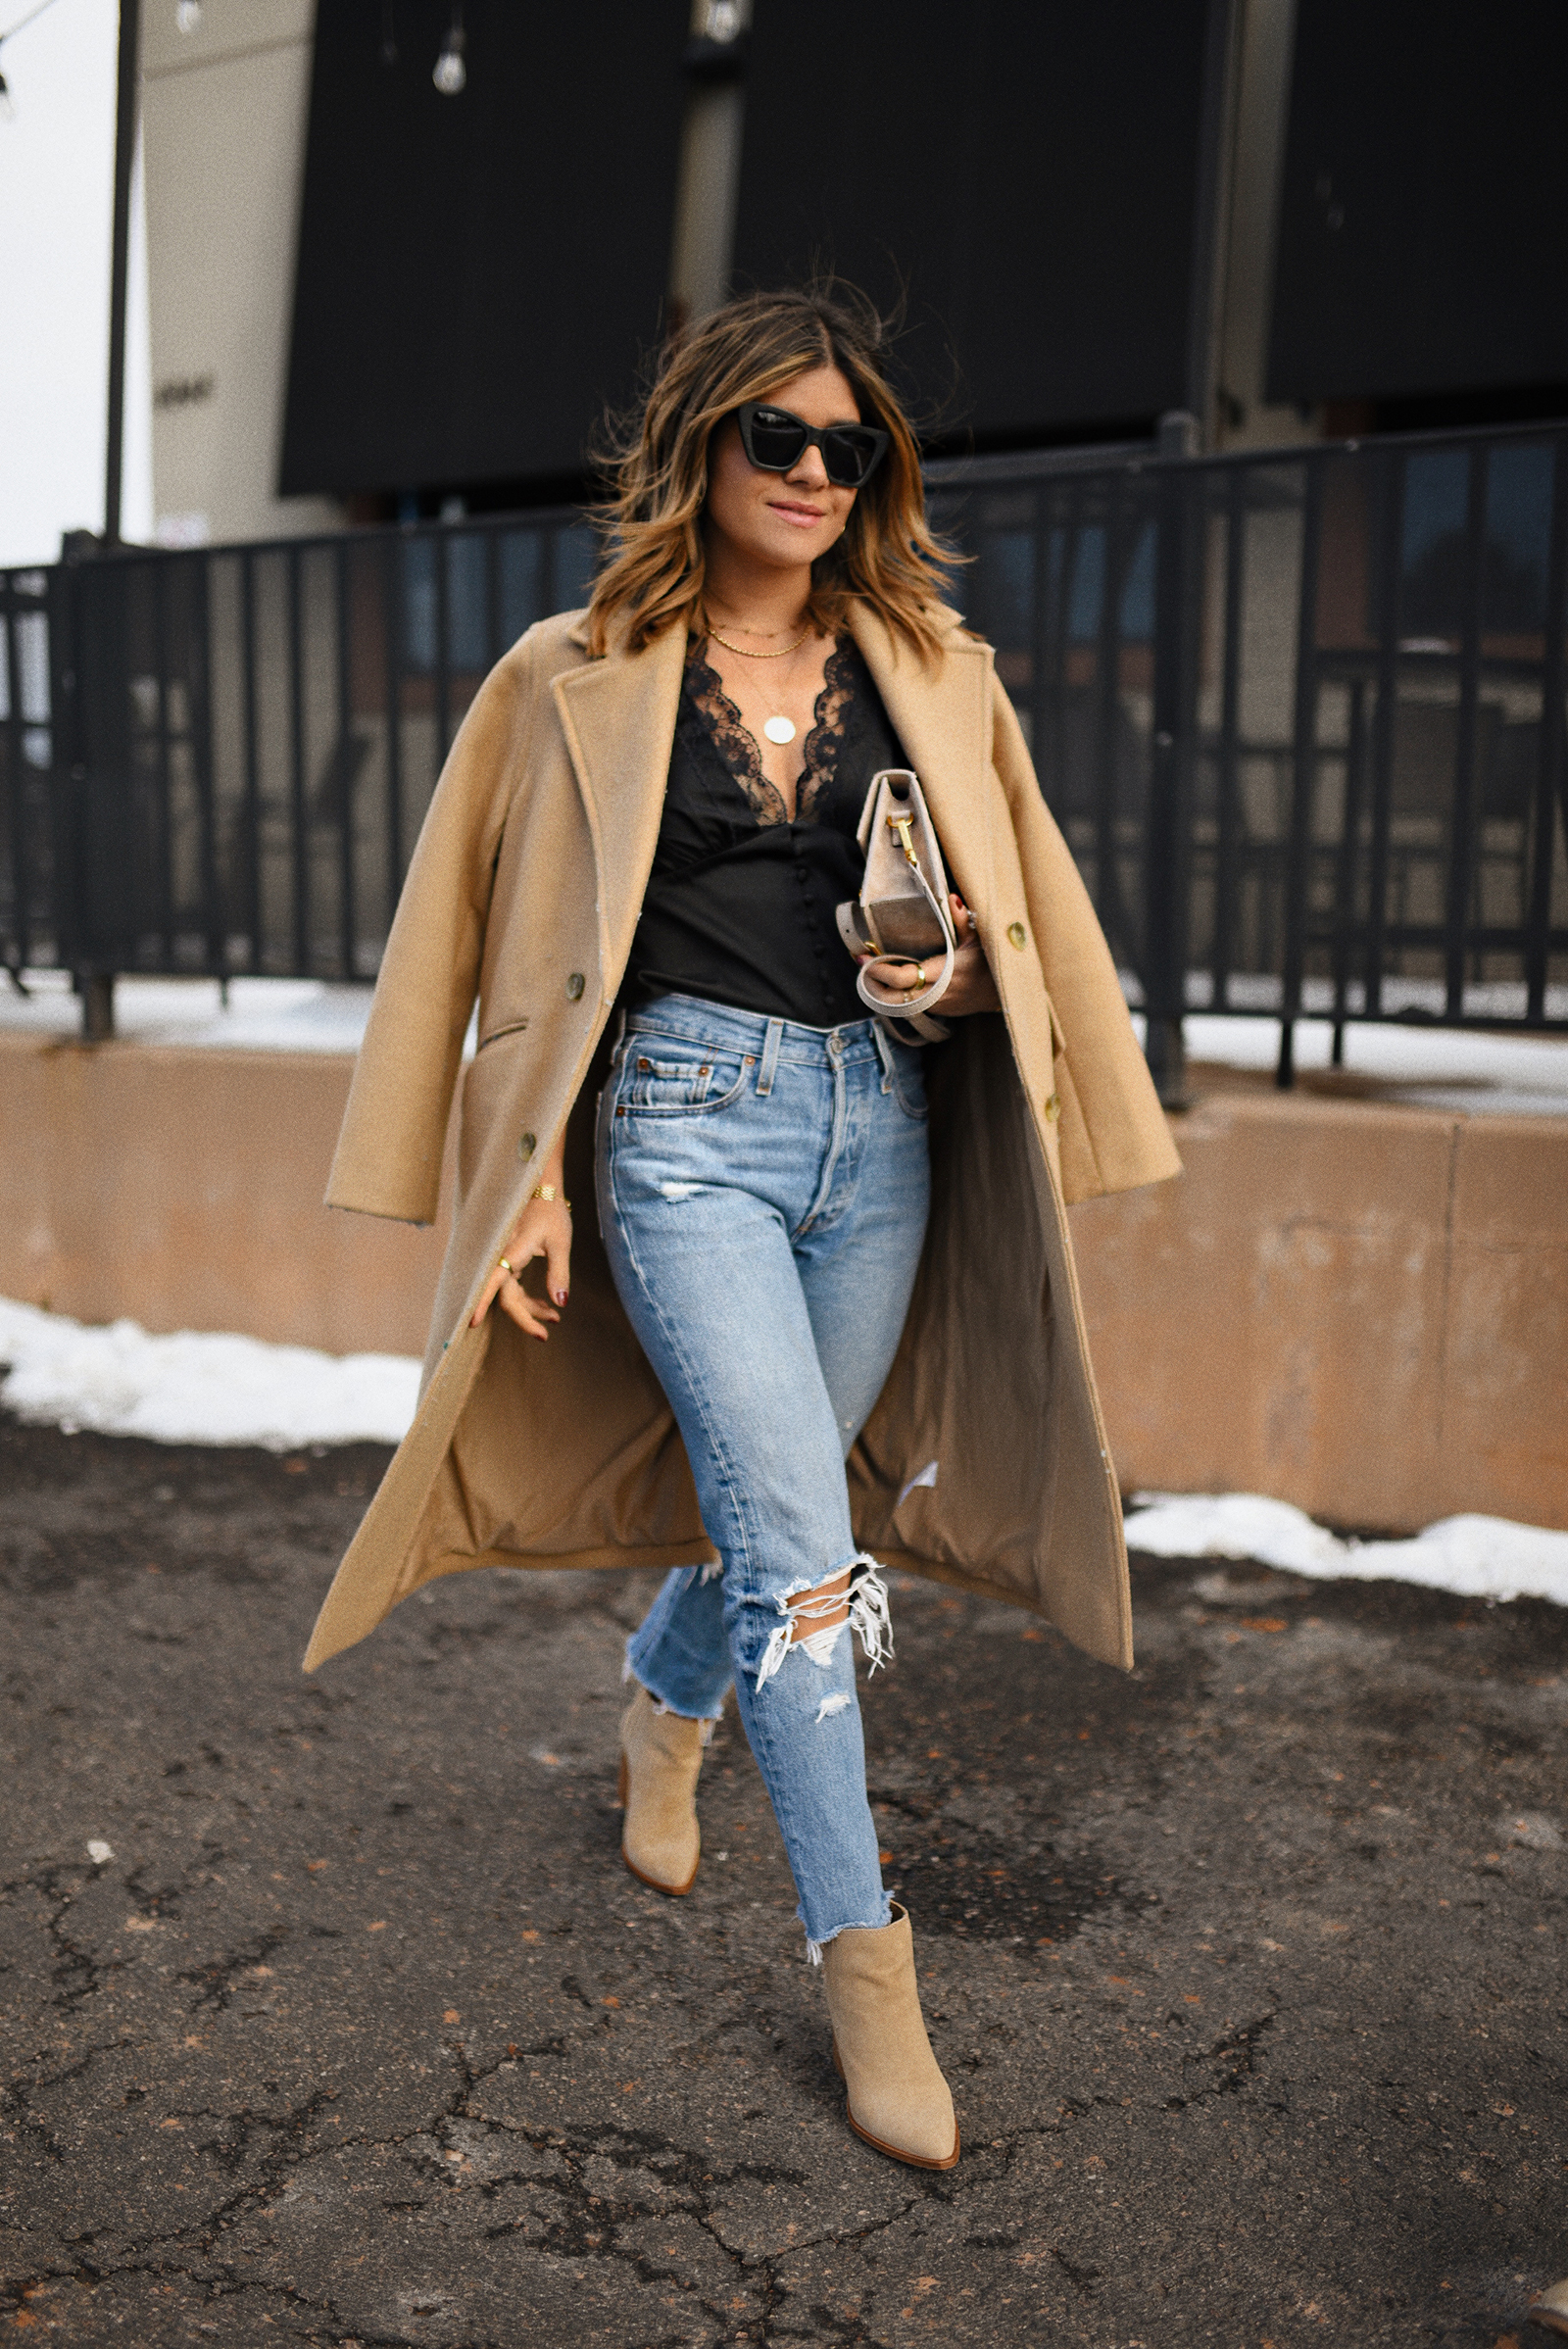 PINTEREST MOST POPULAR OUTFITS - CHIC TALK